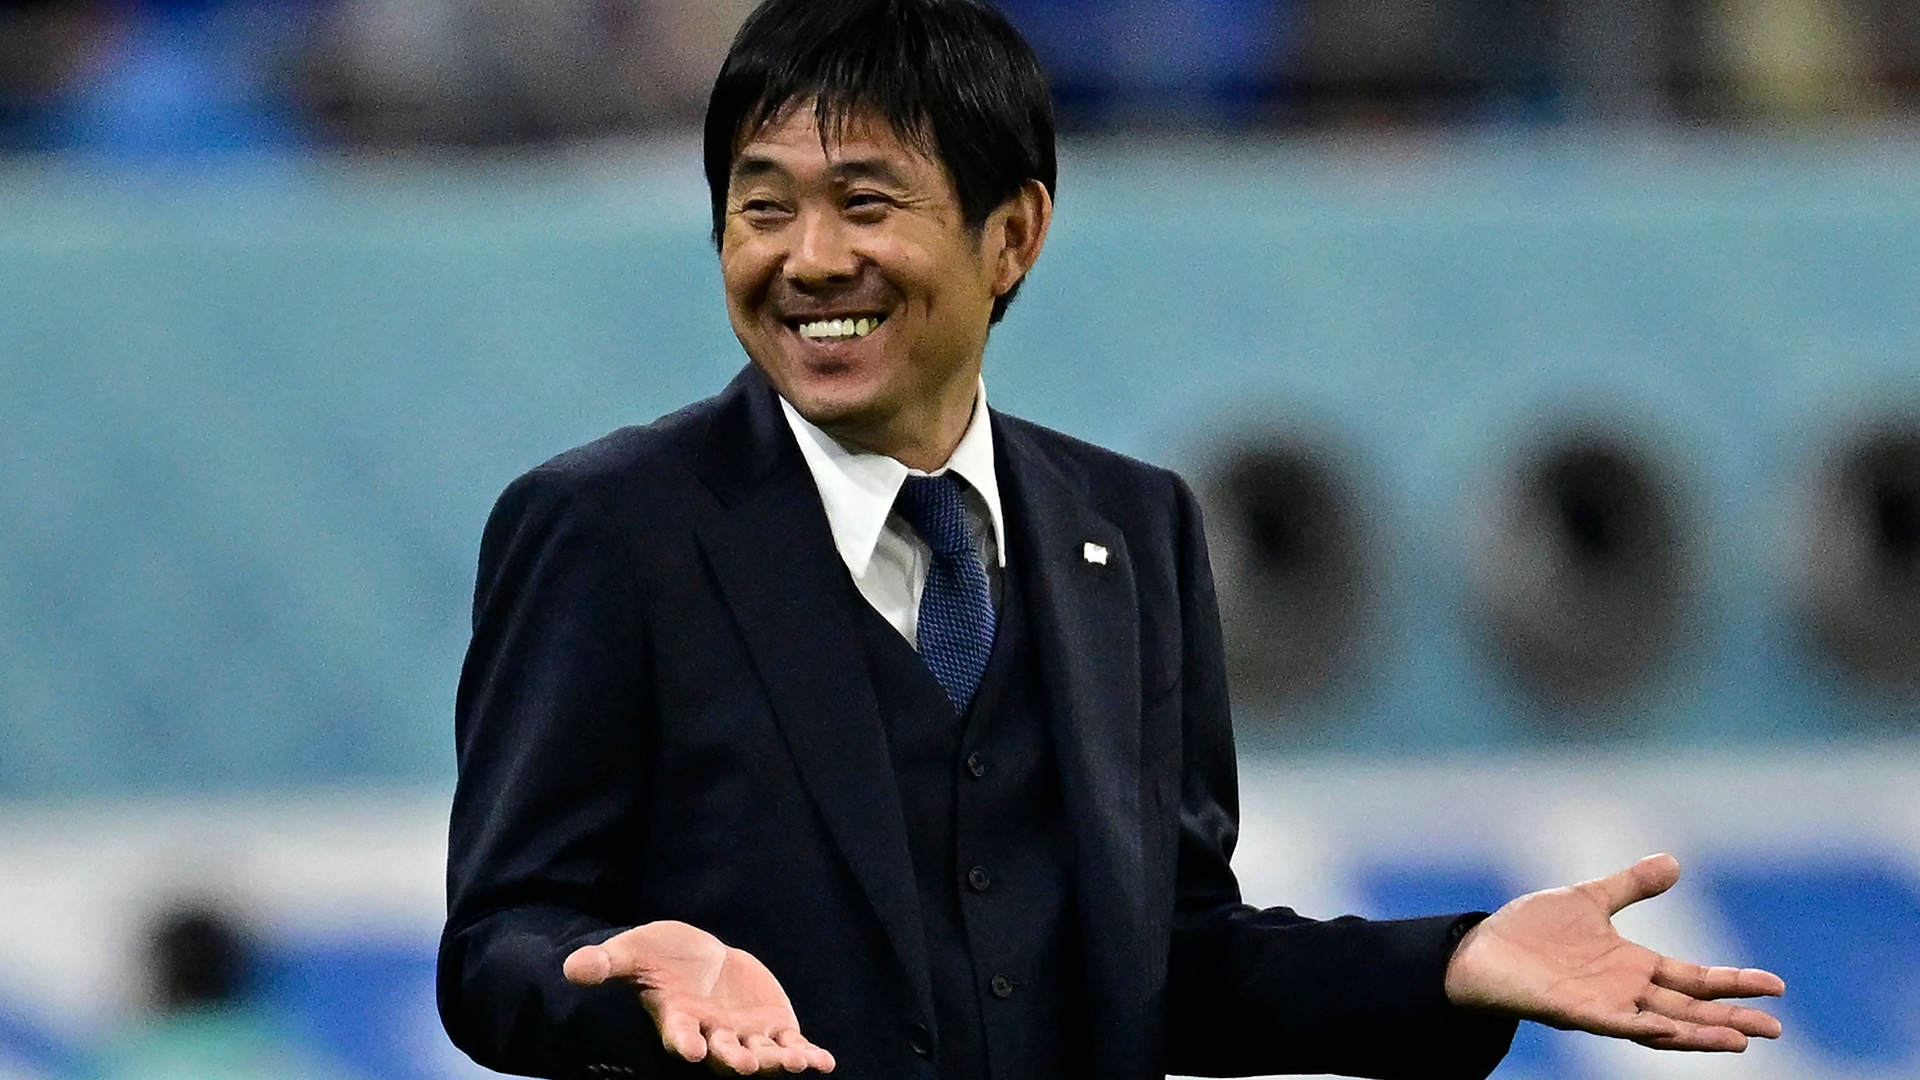 Japan's coach #00 Hajime Moriyasu reacts during the Qatar 2022 World Cup Group E football match between Japan and Spain at the Khalifa International Stadium in Doha on December 1, 2022. (Photo by JAVIER SORIANO / AFP)